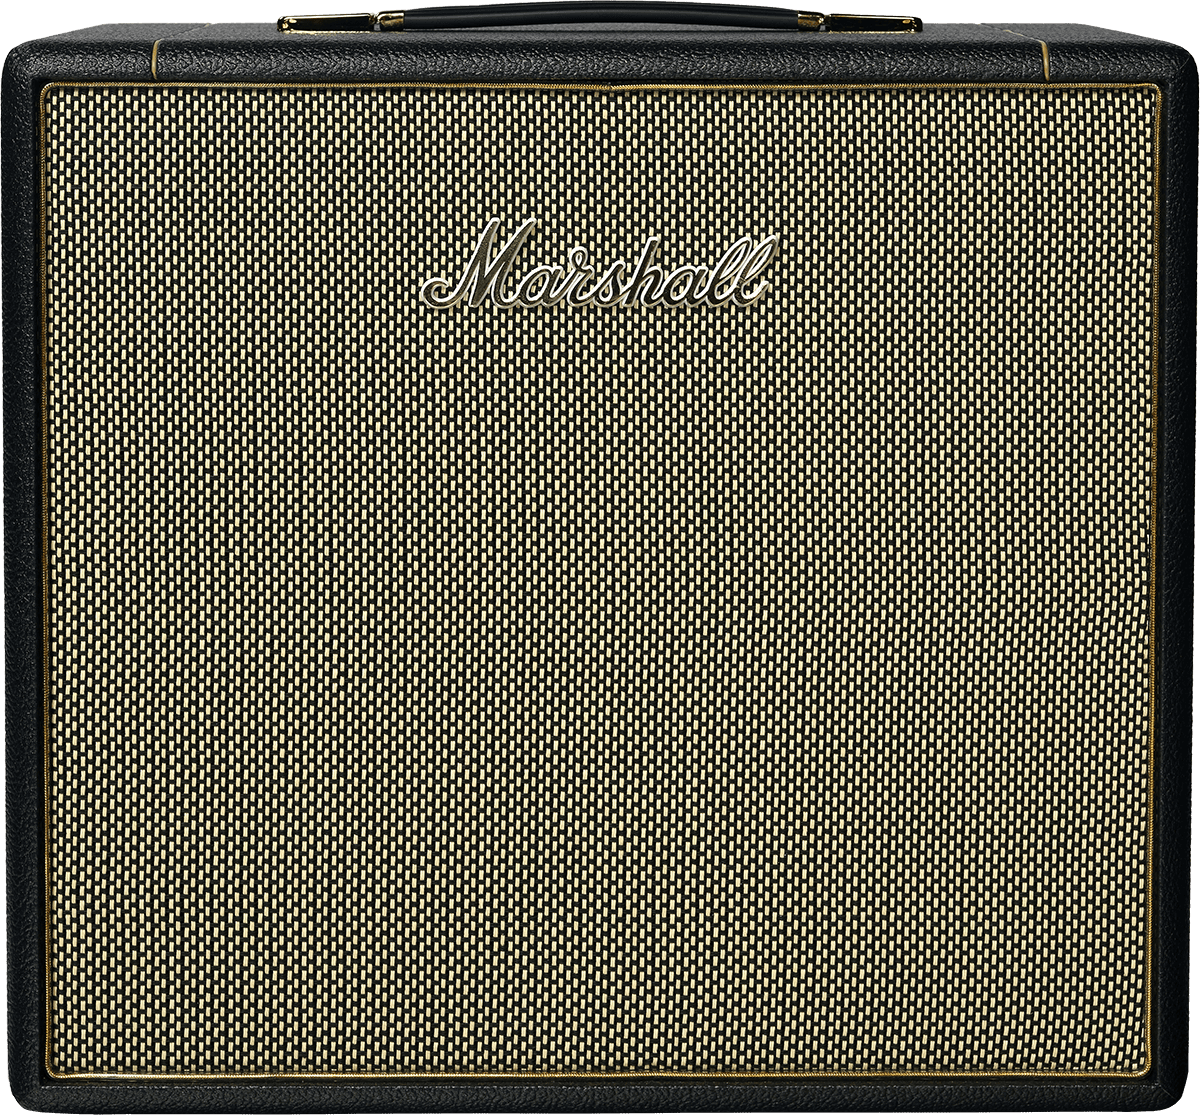 Marshall Studio Vintage 1x12 - Electric guitar amp cabinet - Main picture